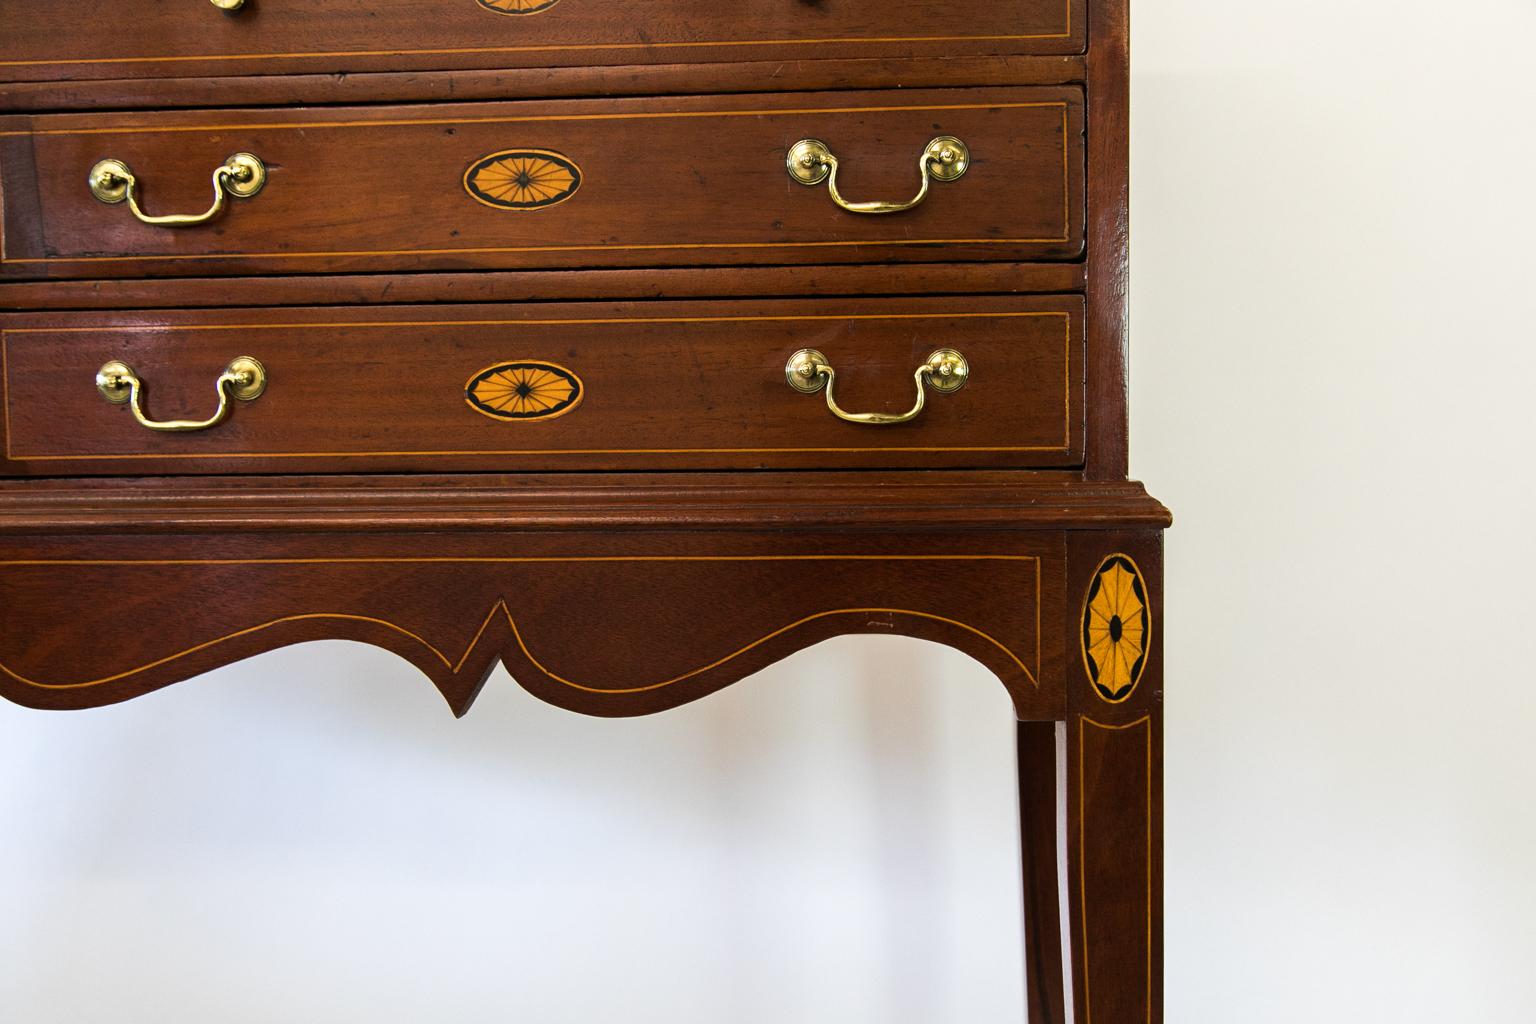 English mahogany sixteen-drawer chest, rests on a custom made base. The graduated drawers are inlaid with boxwood and oval medallions. It has been refinished, and the inlay and hardware were added later.